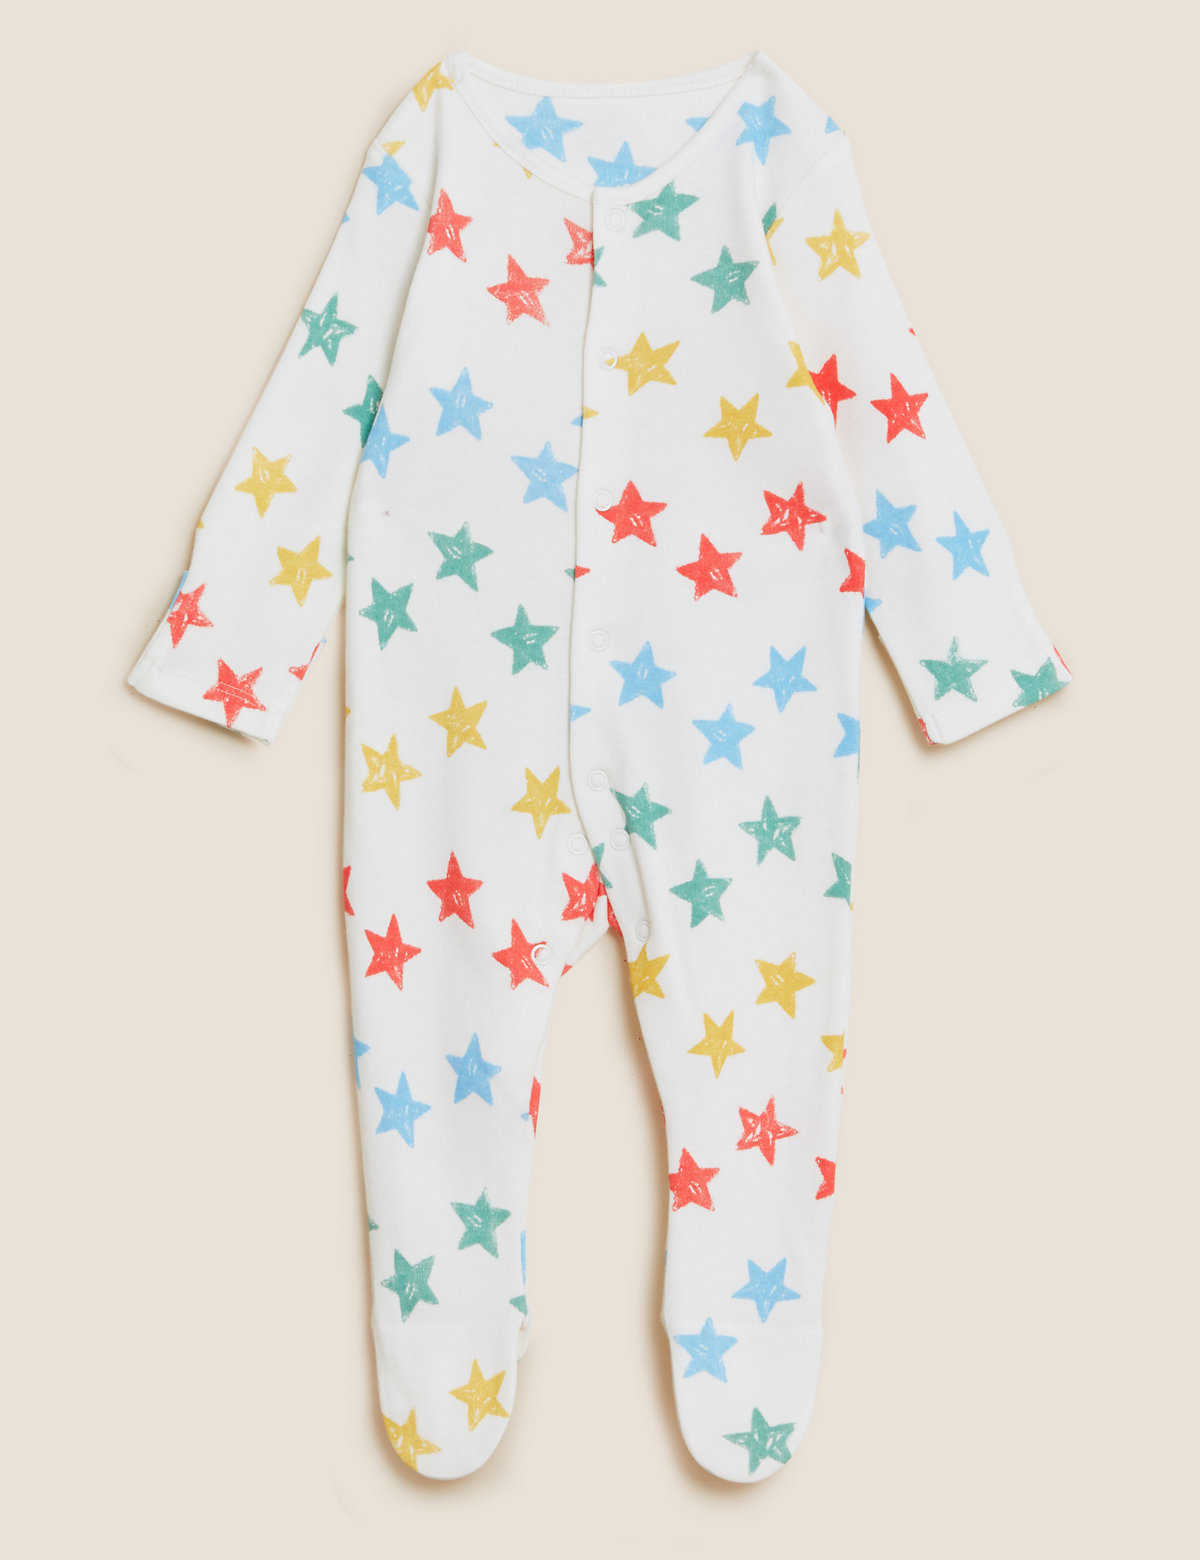 3pk Pure Cotton Printed Sleepsuits